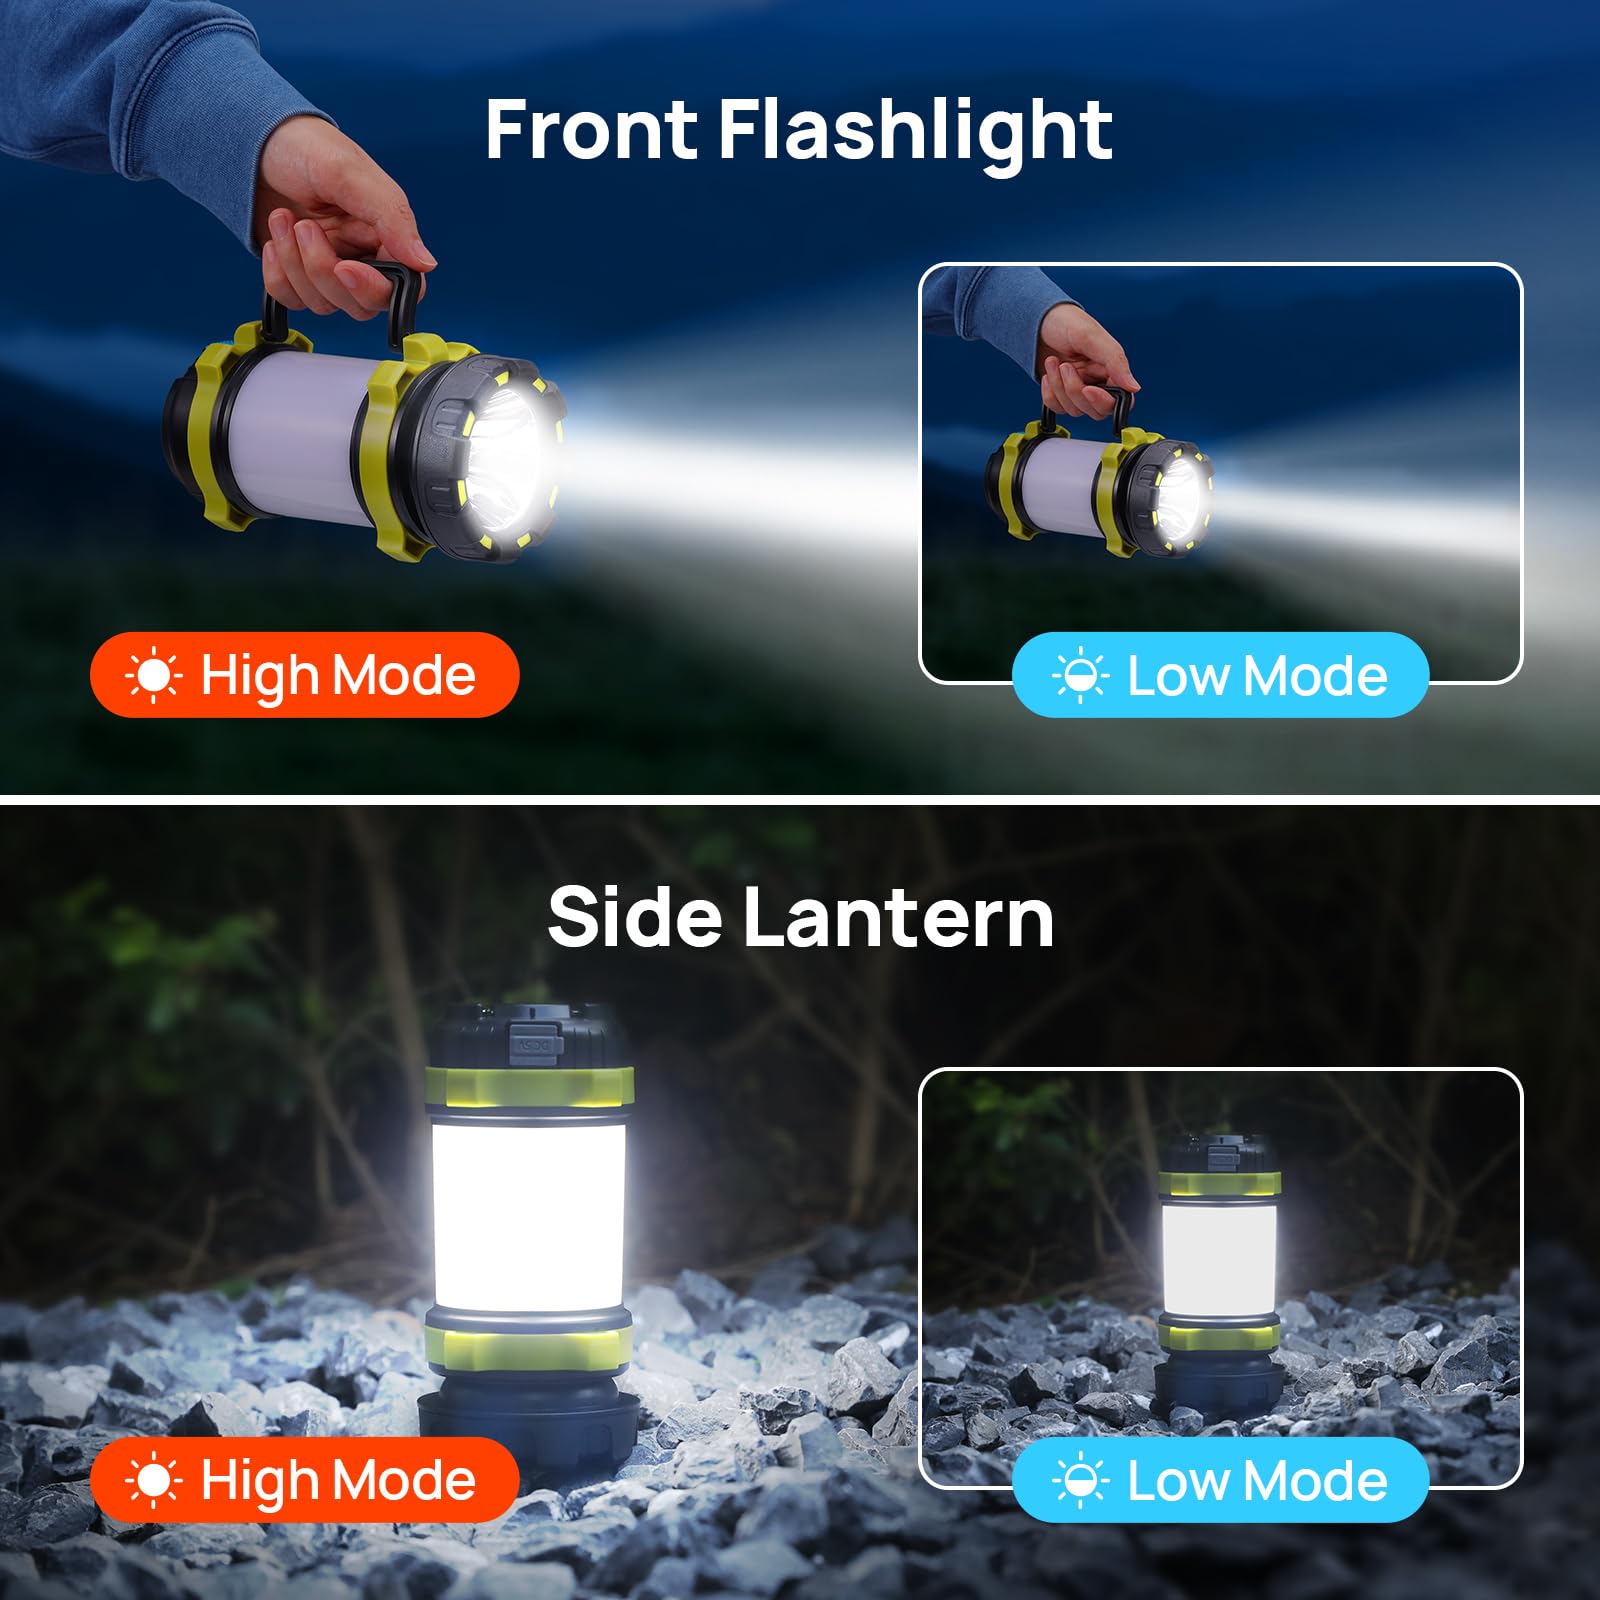 LED Camping Lantern Flashlight Rechargeable(Pack of 1), Consciot Portable Torch with 6 Light Modes, 3600mAh Power Bank, IPX4 Waterproof, USB C, Camping Lights for Hurricane, Emergency, Survival Kits